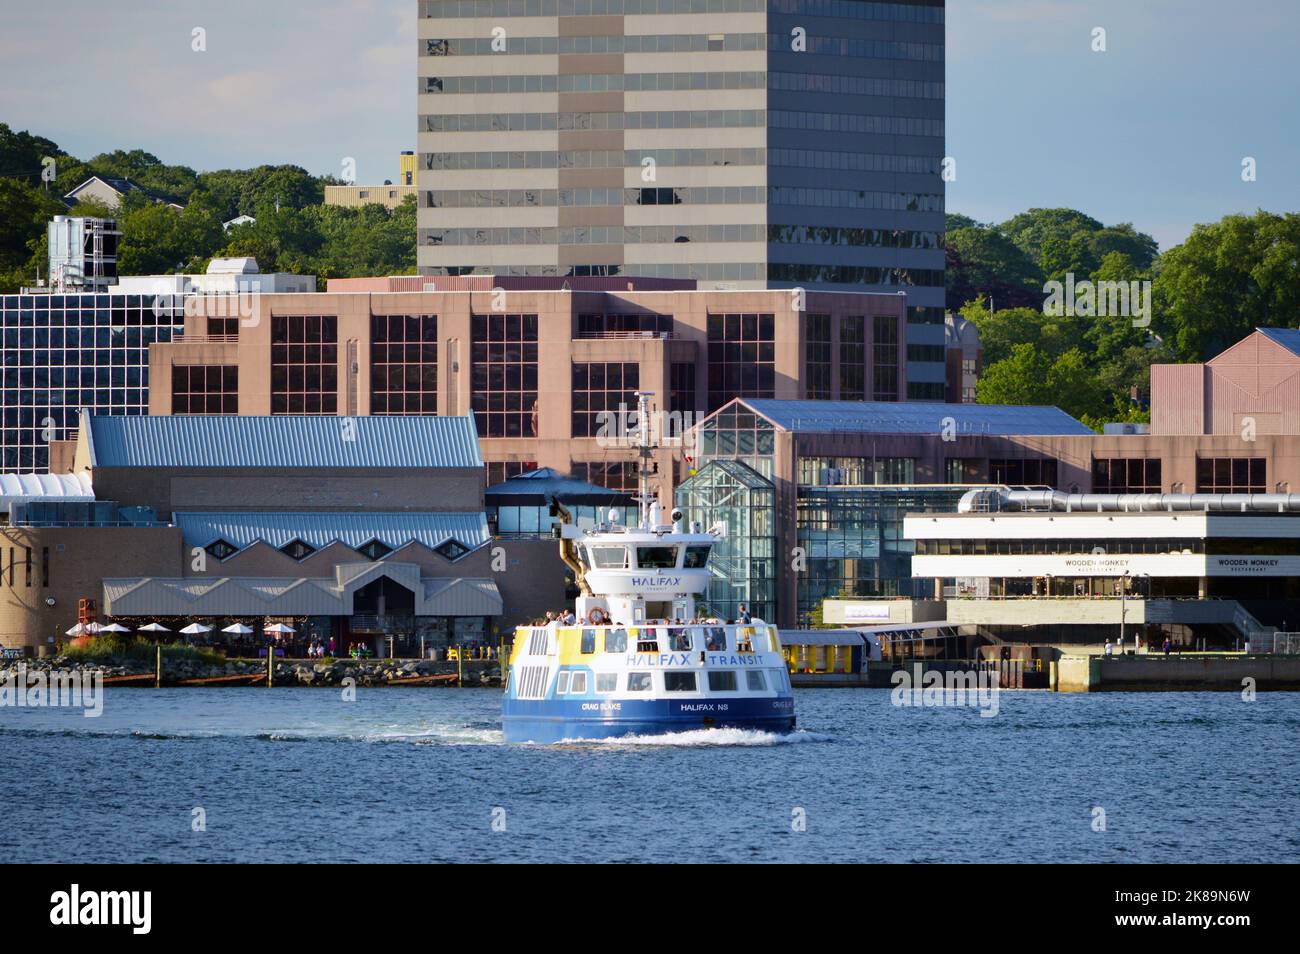 Halifax Transit ferry 'Craig Blake' departs the Alderney ferry terminal in downtown Dartmouth, Nova Scotia, Canada with Alderley Landing in the background. Stock Photo